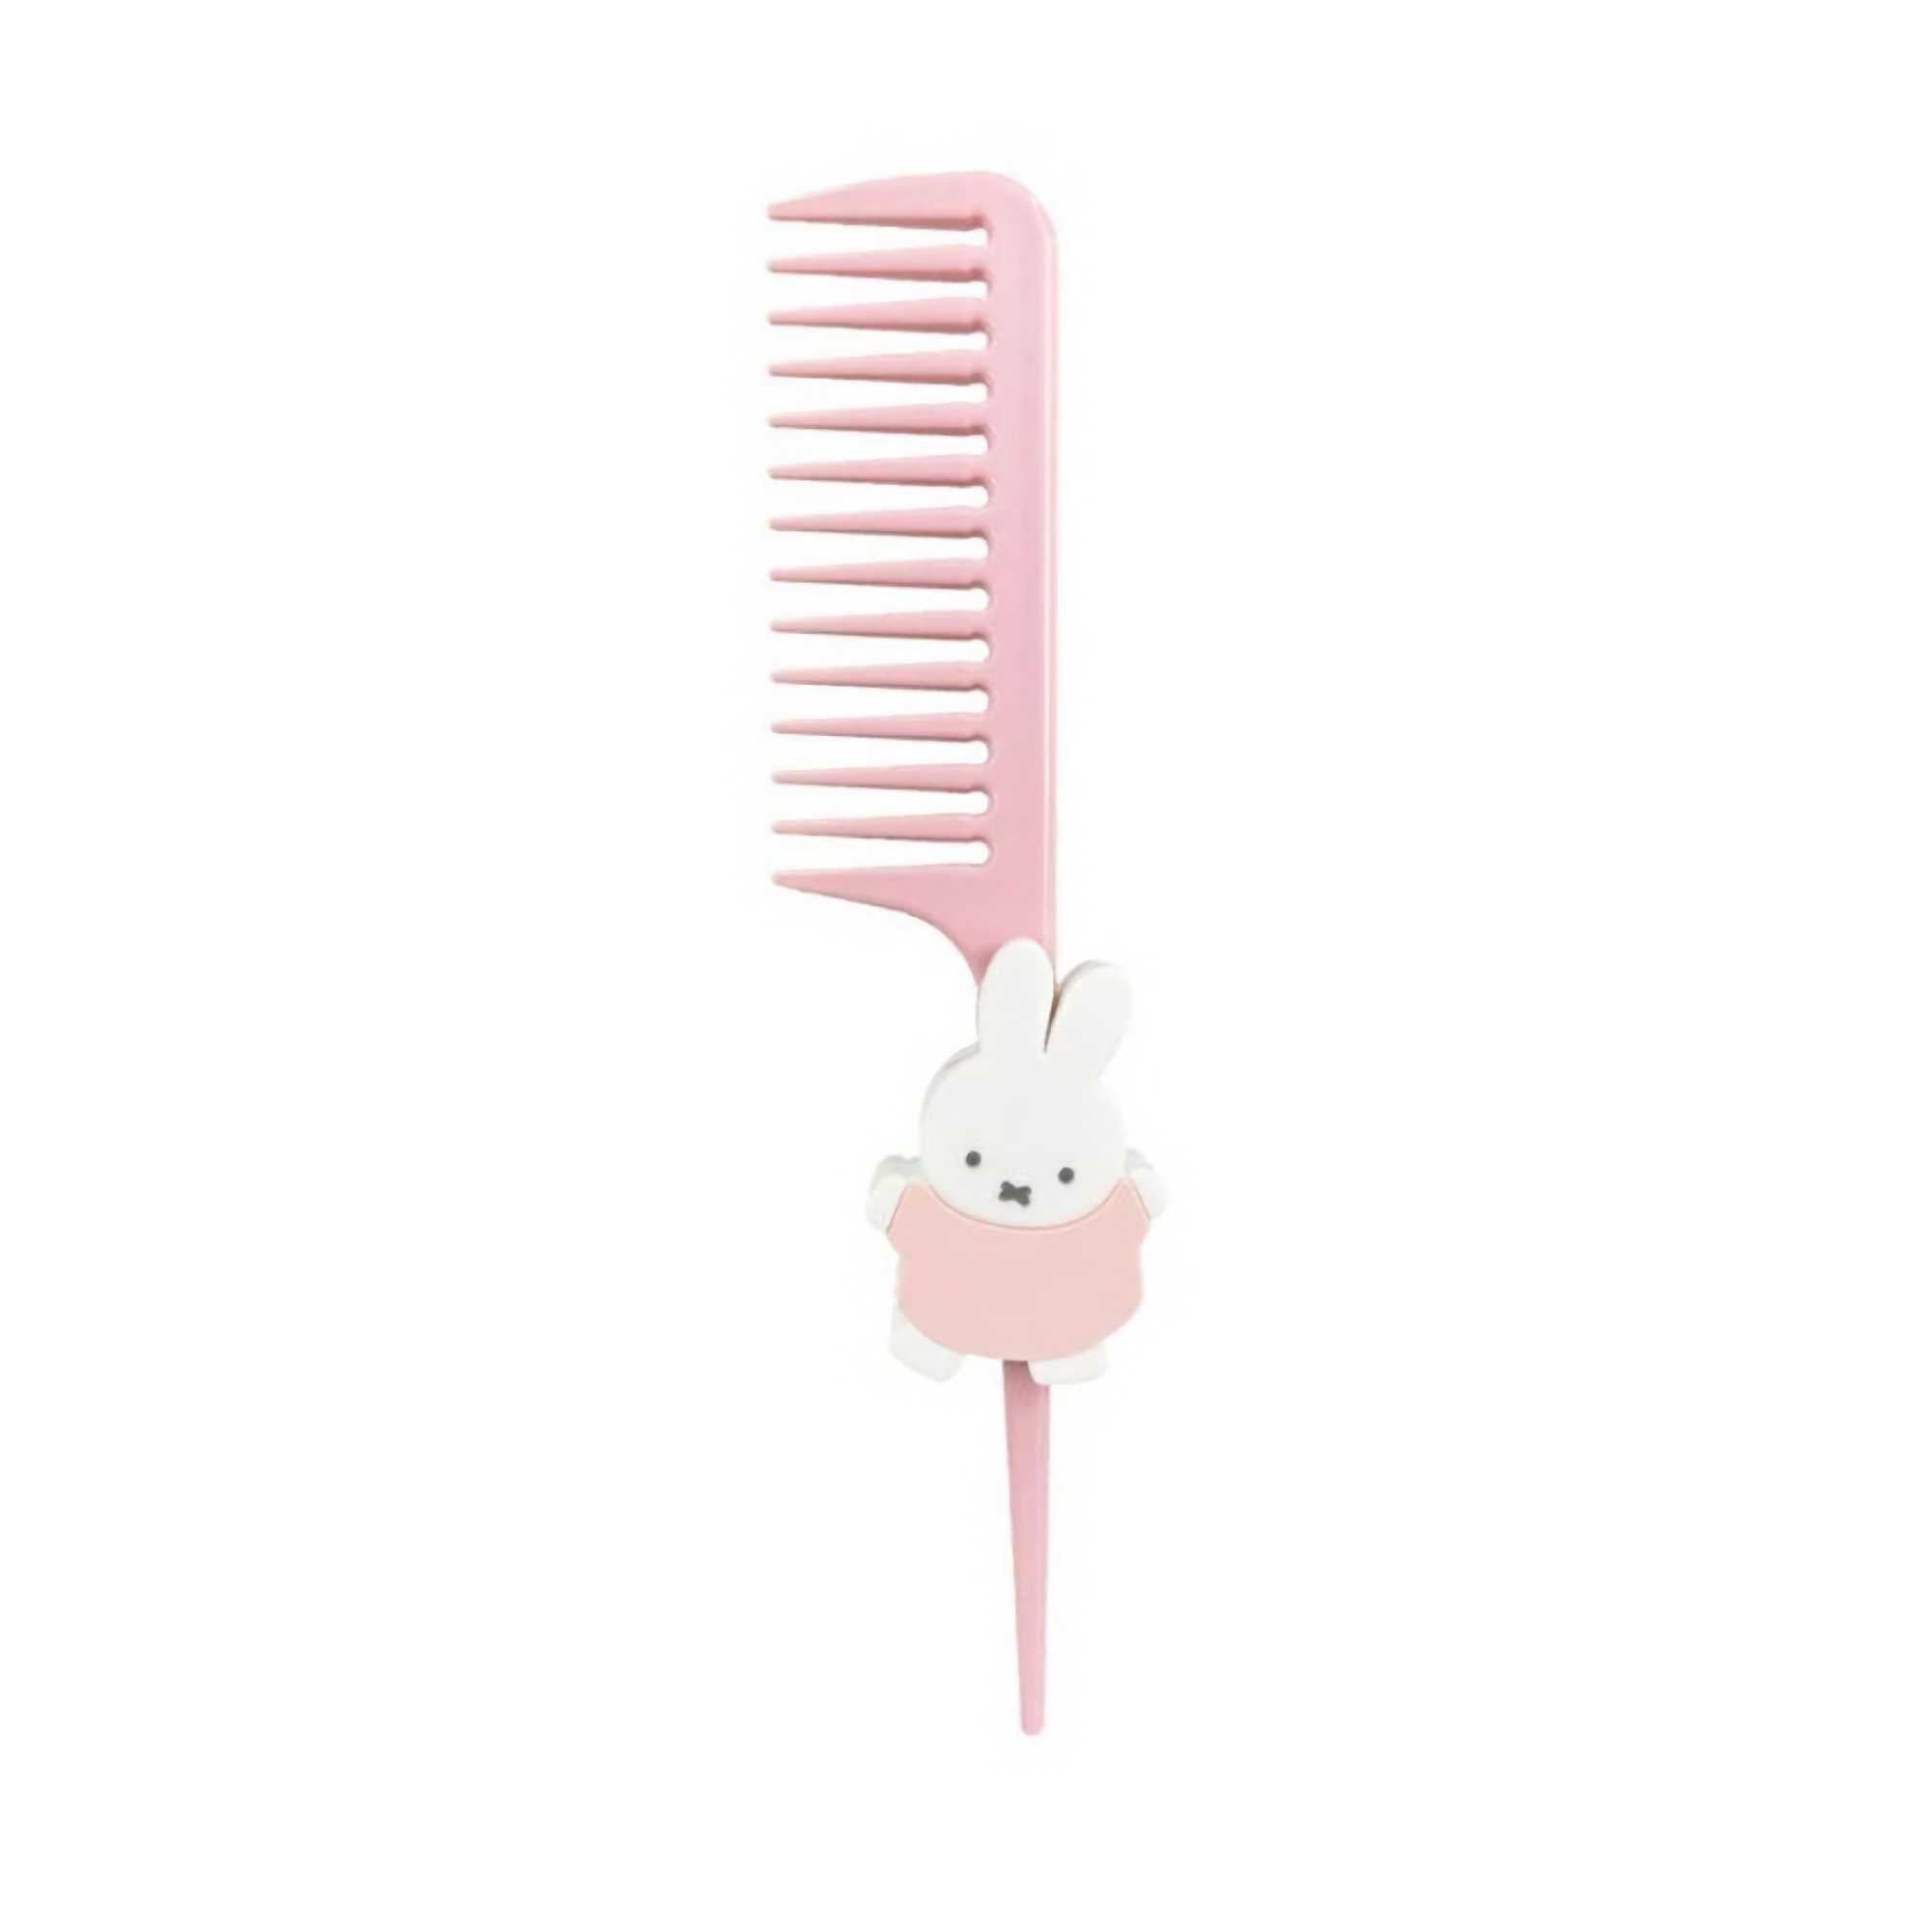 Miffy Hair Comb Treatment Comb Holder Set, Pink